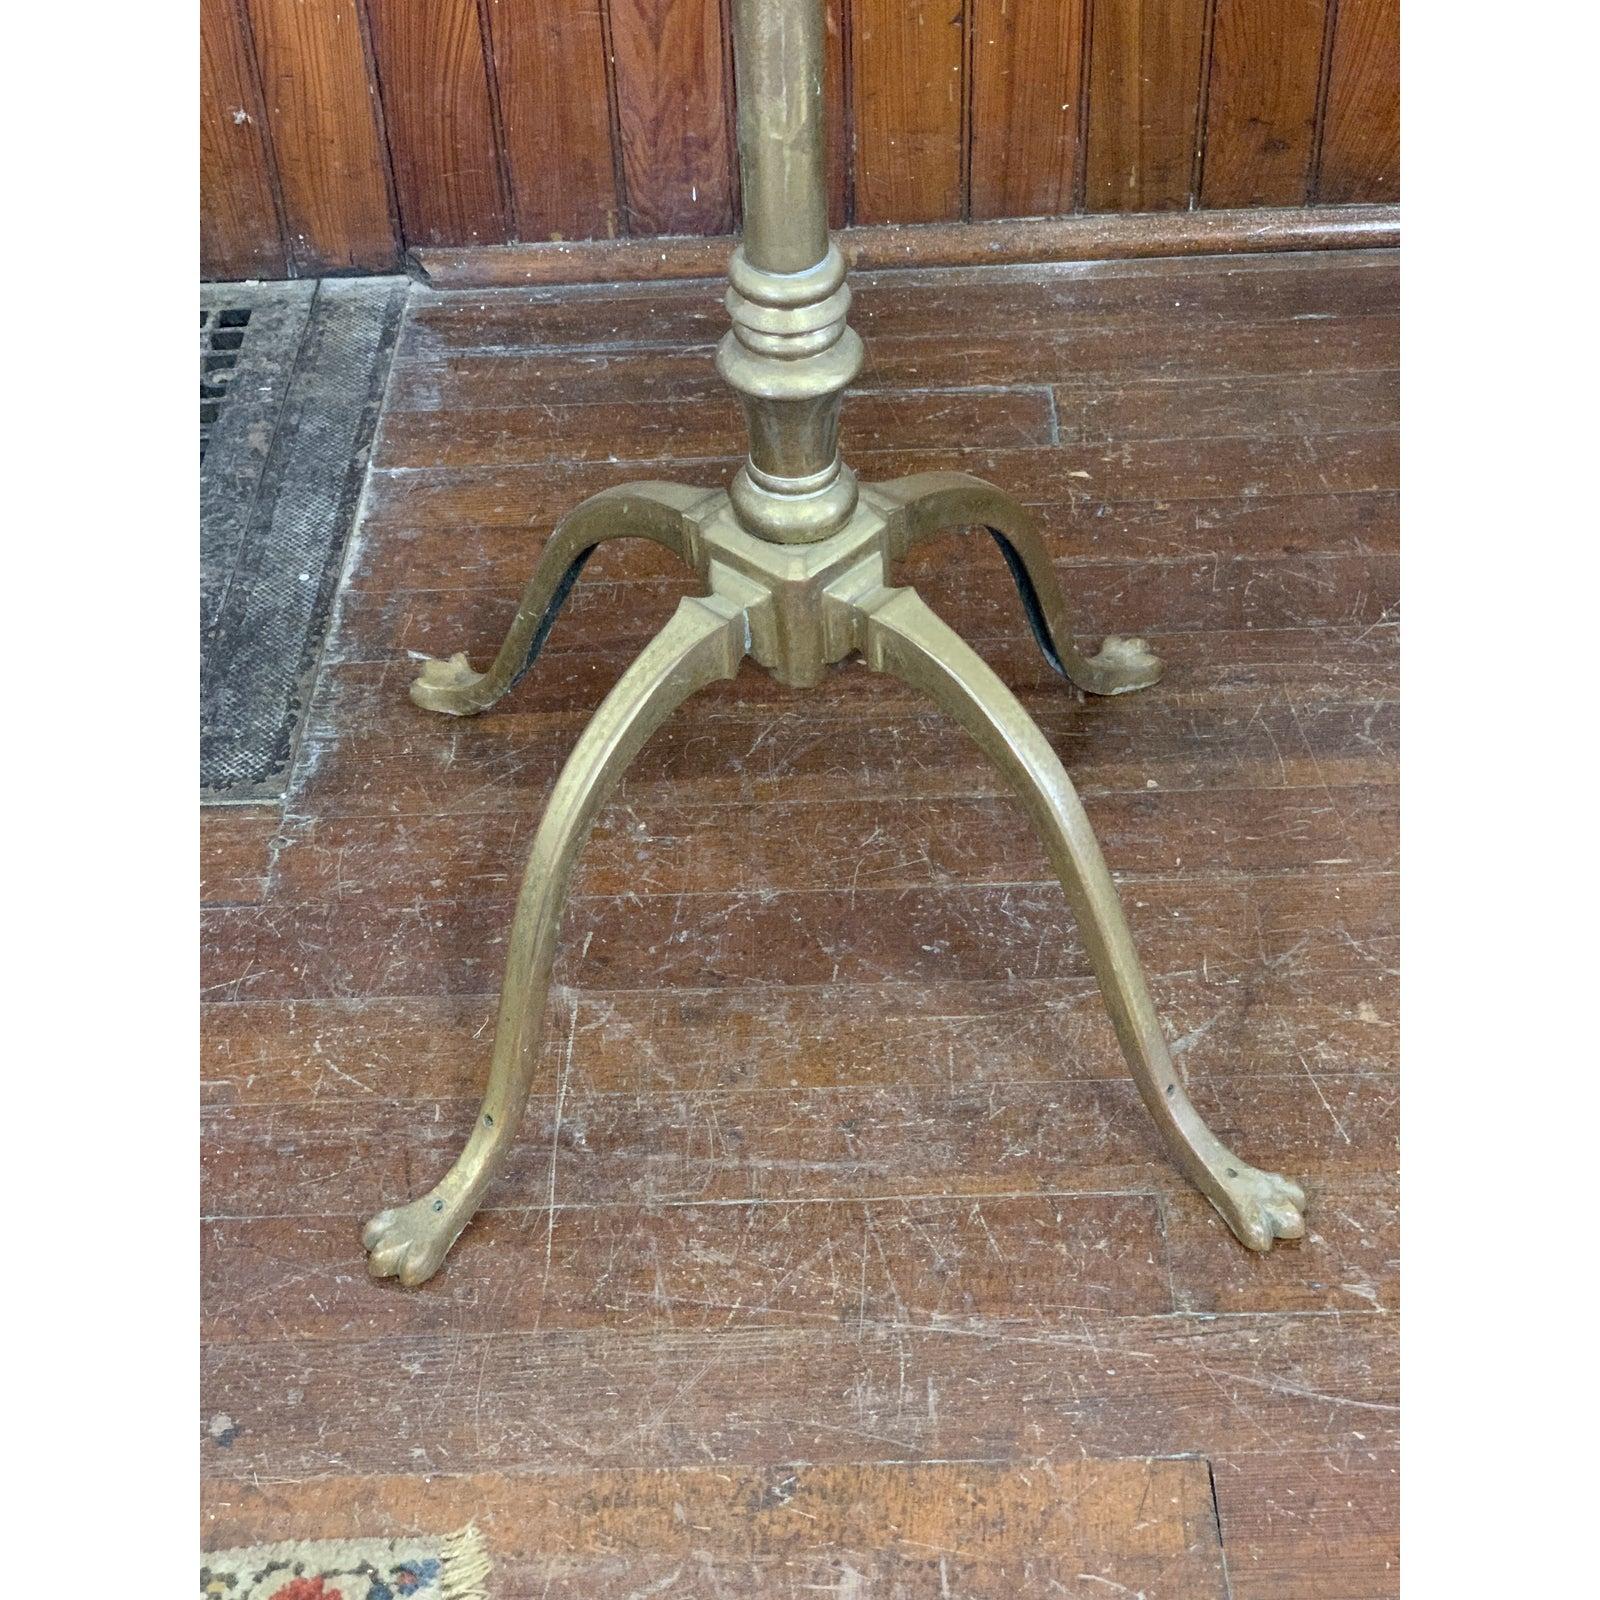 For sale is this absolutely stunning brass antique oil floor lamp made by was Benson. The lamp is in nice condition for its age. Also very well made and heavy. Gorgeous leaf design with claw feet.